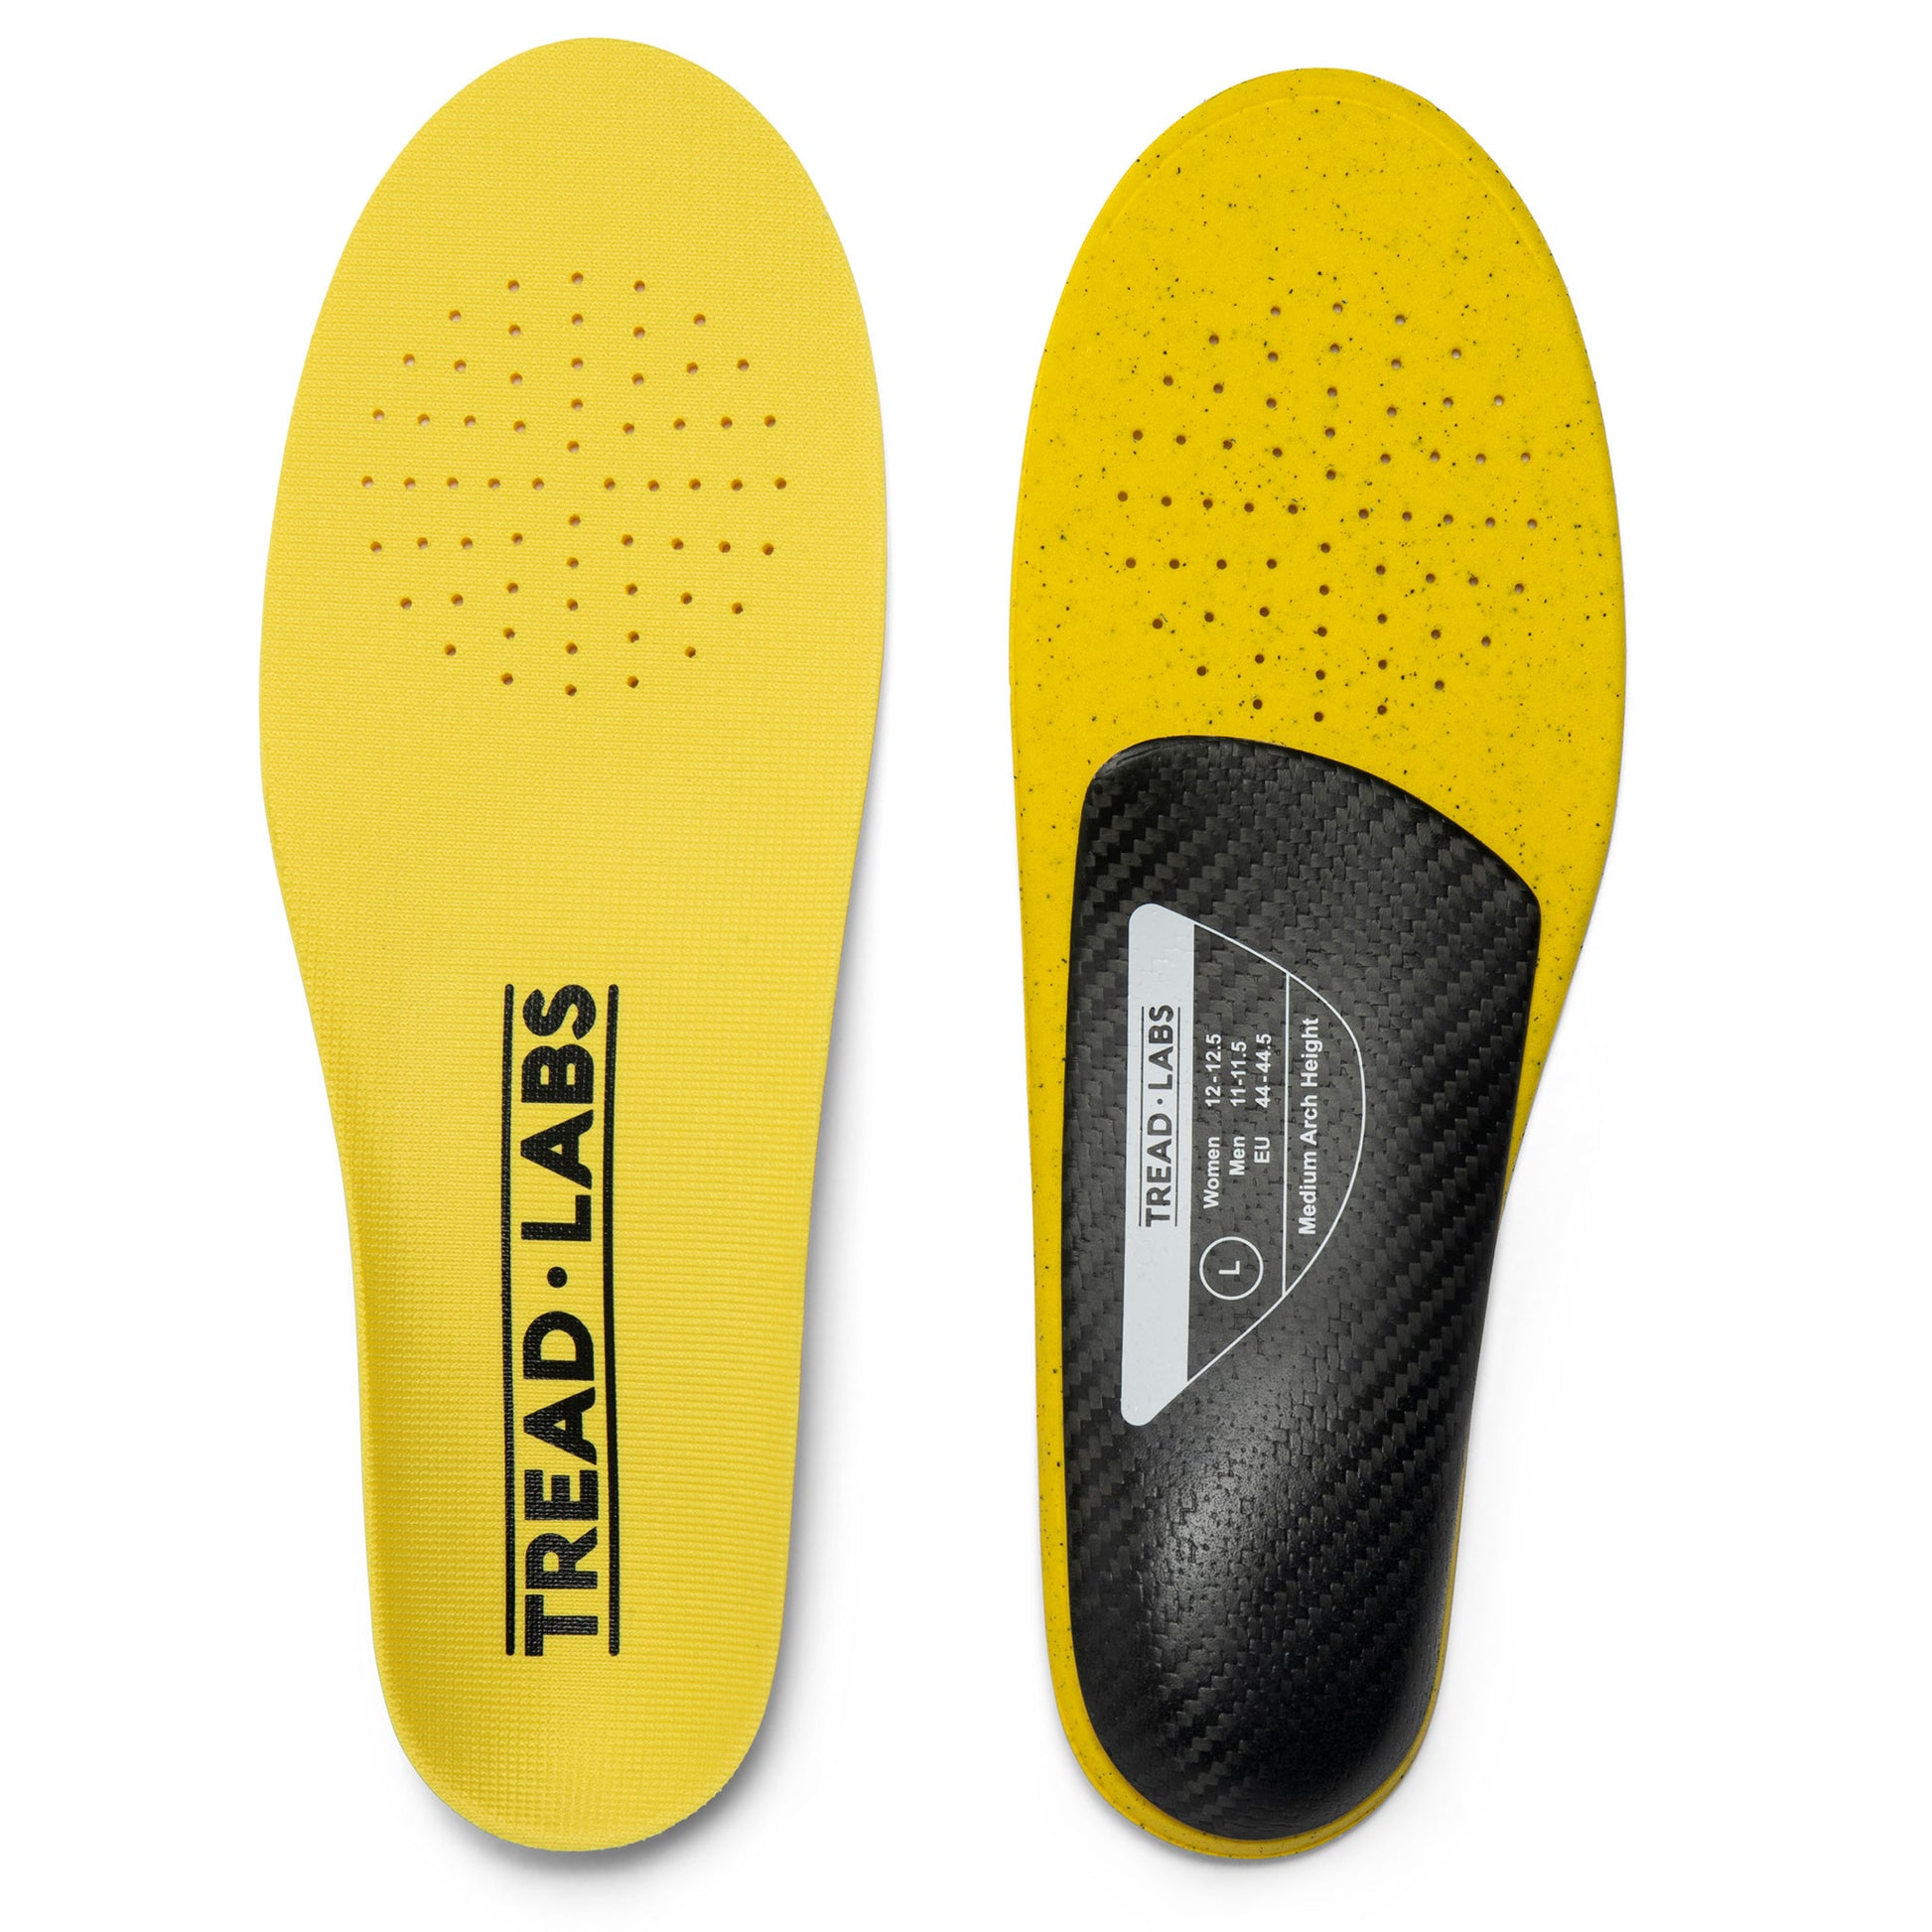 Dash Thin Insole With Carbon Fiber Arch Supports And Ventilated Top Covers